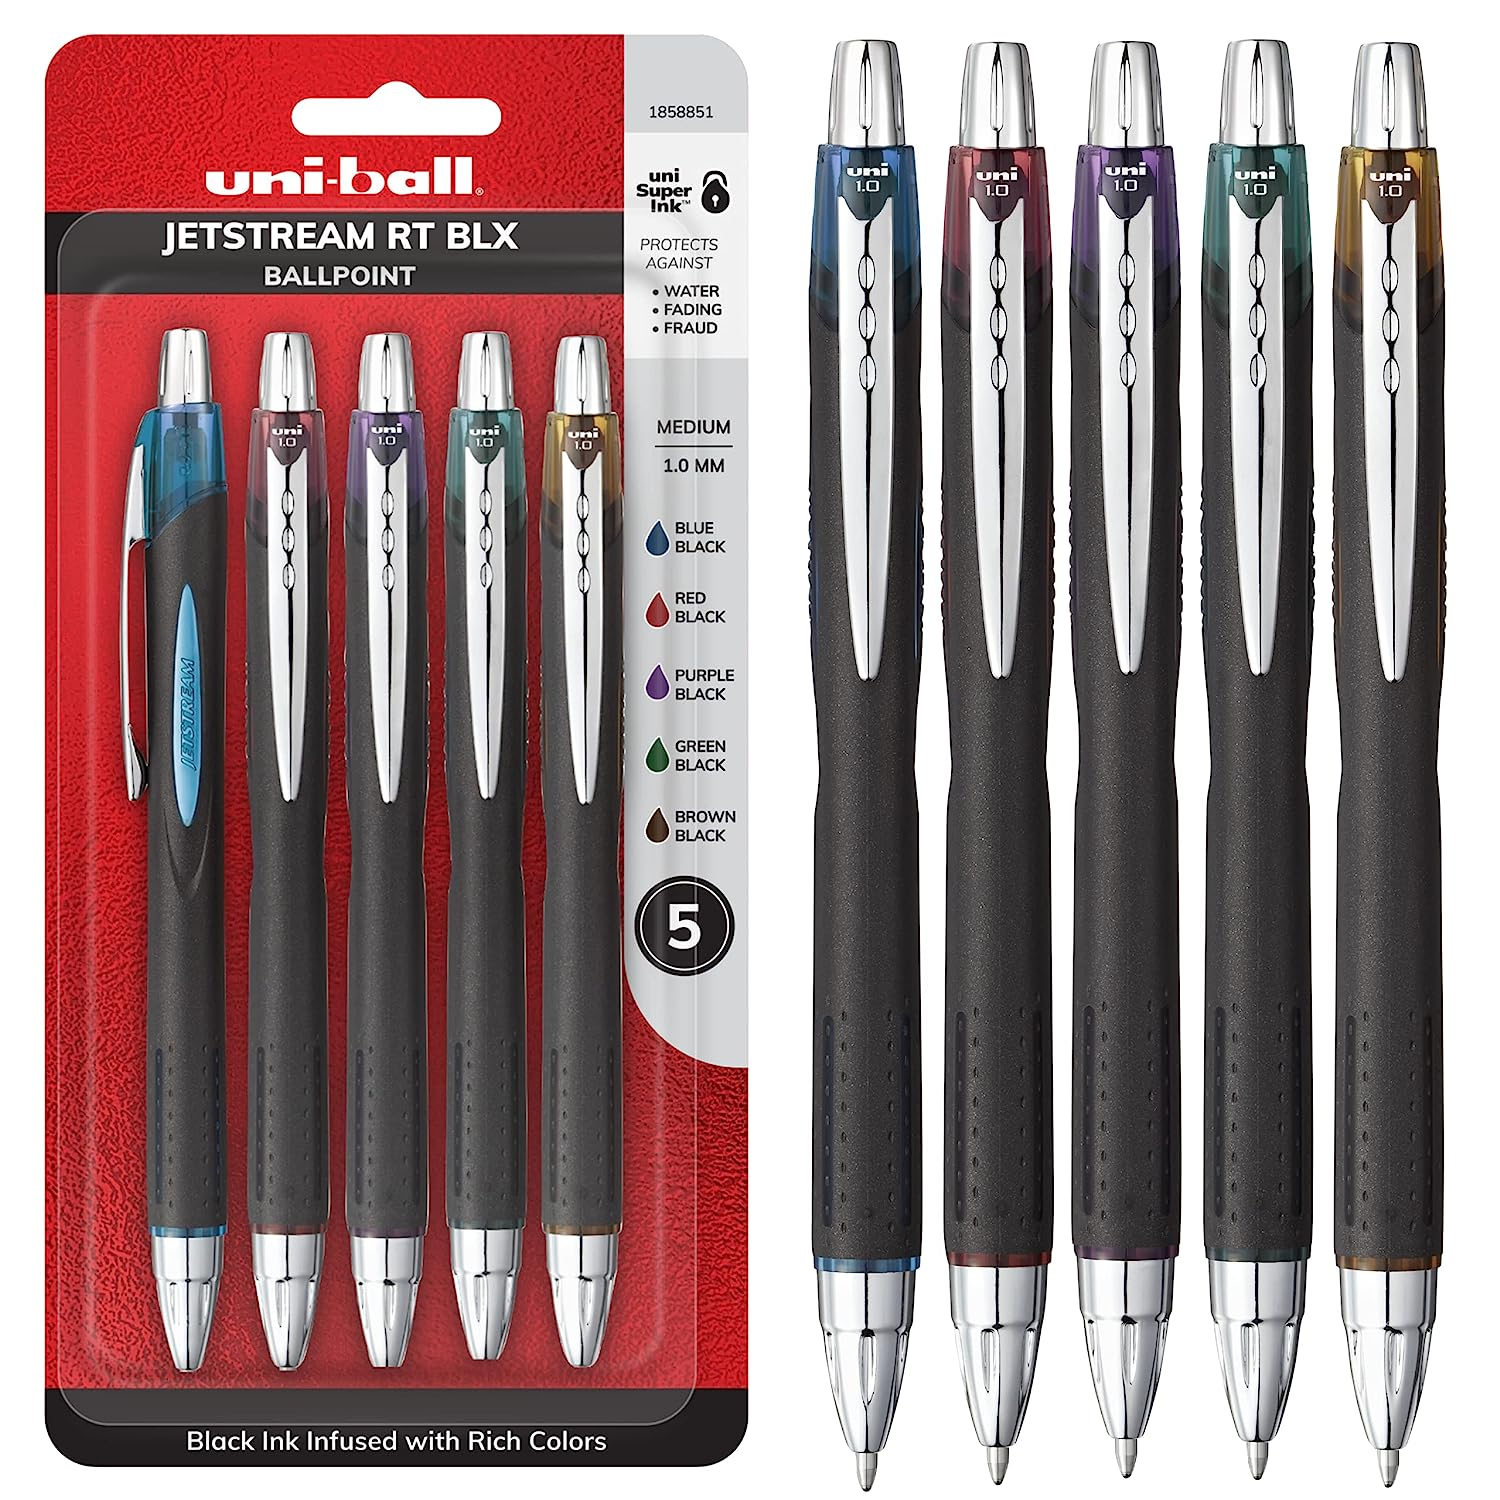 Erasable Gel Pens, 15 Colors Lineon Retractable Erasable Pens Clicker, Fine Point, Make Mistakes Disappear, Assorted Color Inks for Drawing Writing